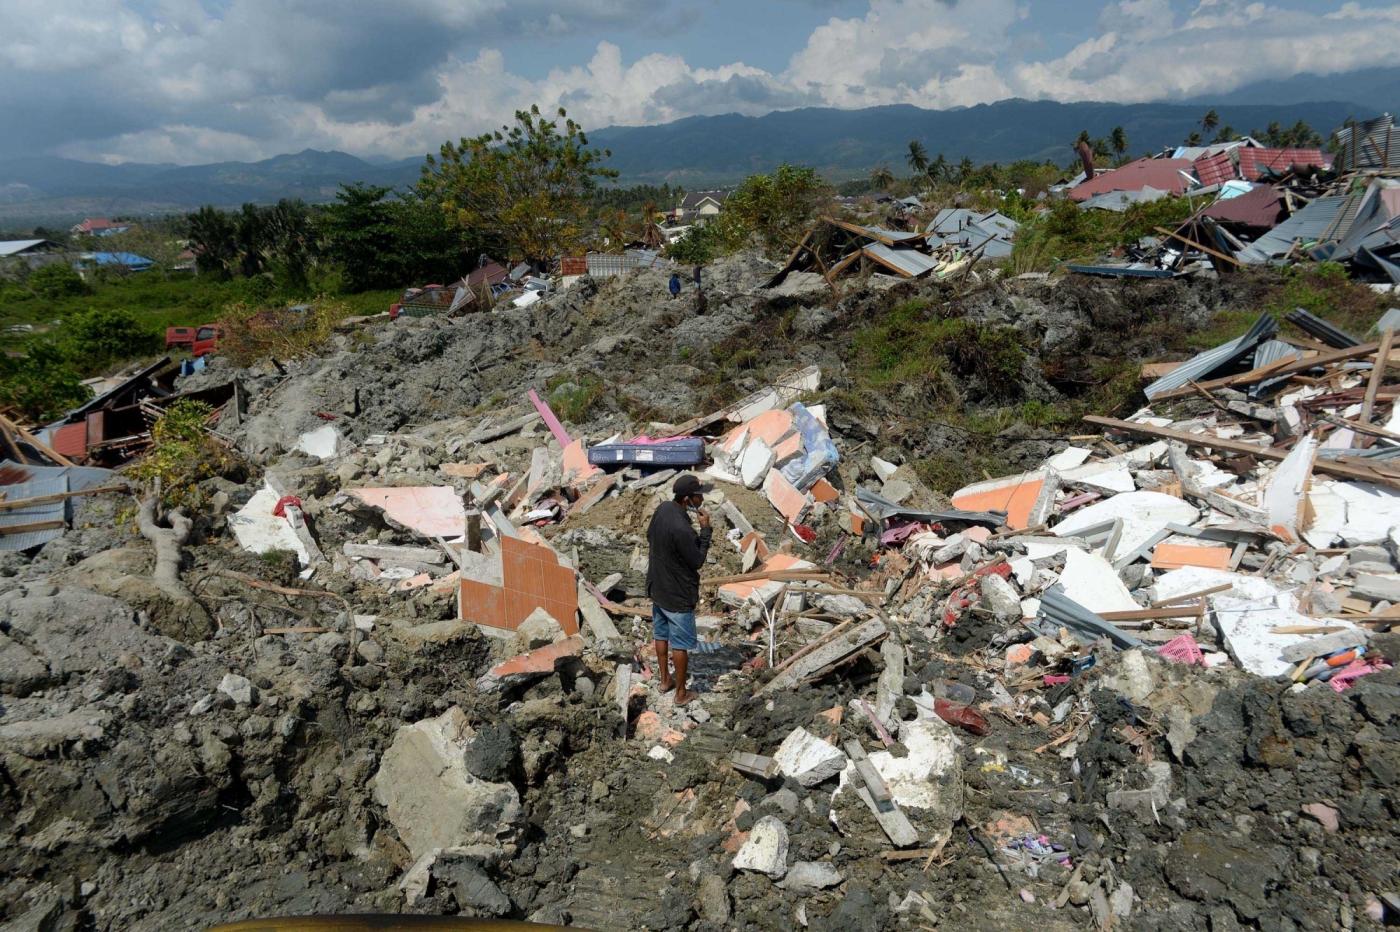 PALU, Oct. 3, 2018 (Xinhua) -- A local resident stands on the ruins at Petobo, in Palu, Central Sulawesi, Indonesia. Oct. 3, 2018. The death toll from Indonesia's multiple earthquakes and an ensuing tsunami jumped to 1,407 on Wednesday, the country's disaster management agency said. (Xinhua/Agung Kuncahya B./IANS) by .